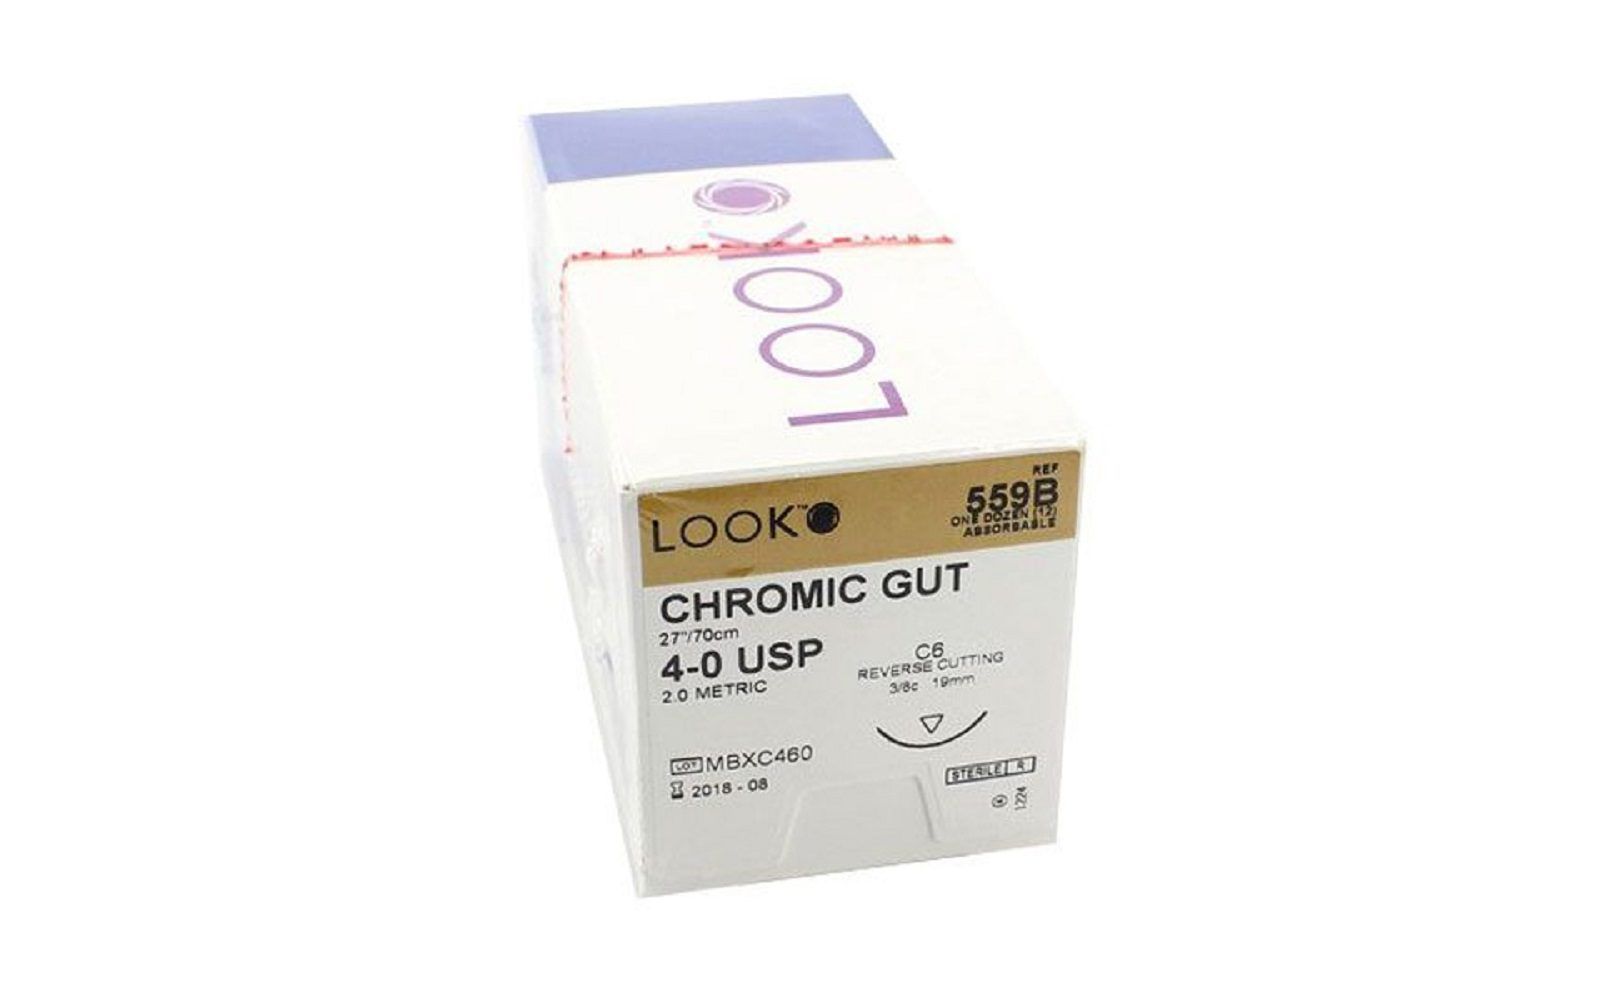 Look Chromic Gut Absorbable Suture